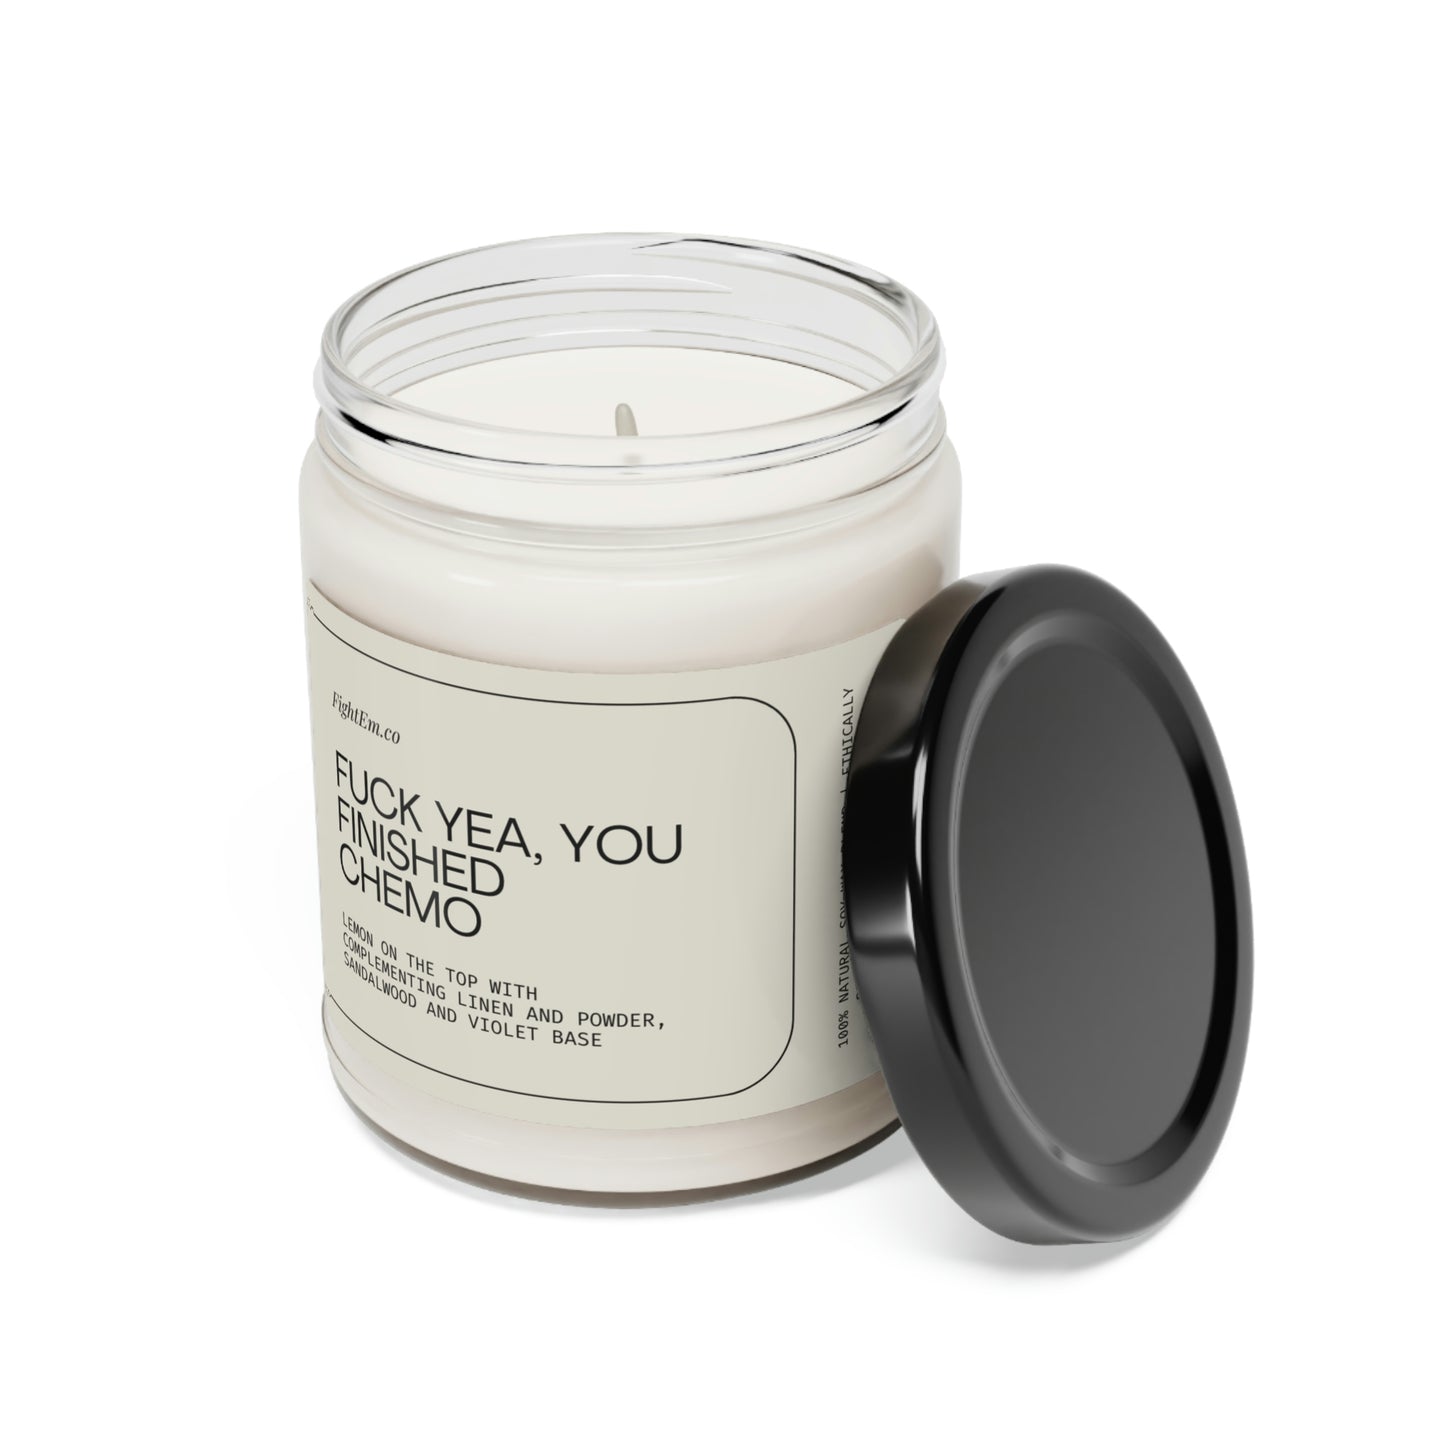 F*ck Yea, You Finished Chemo Scented Soy Candle 9oz 100% Natural Soy Wax